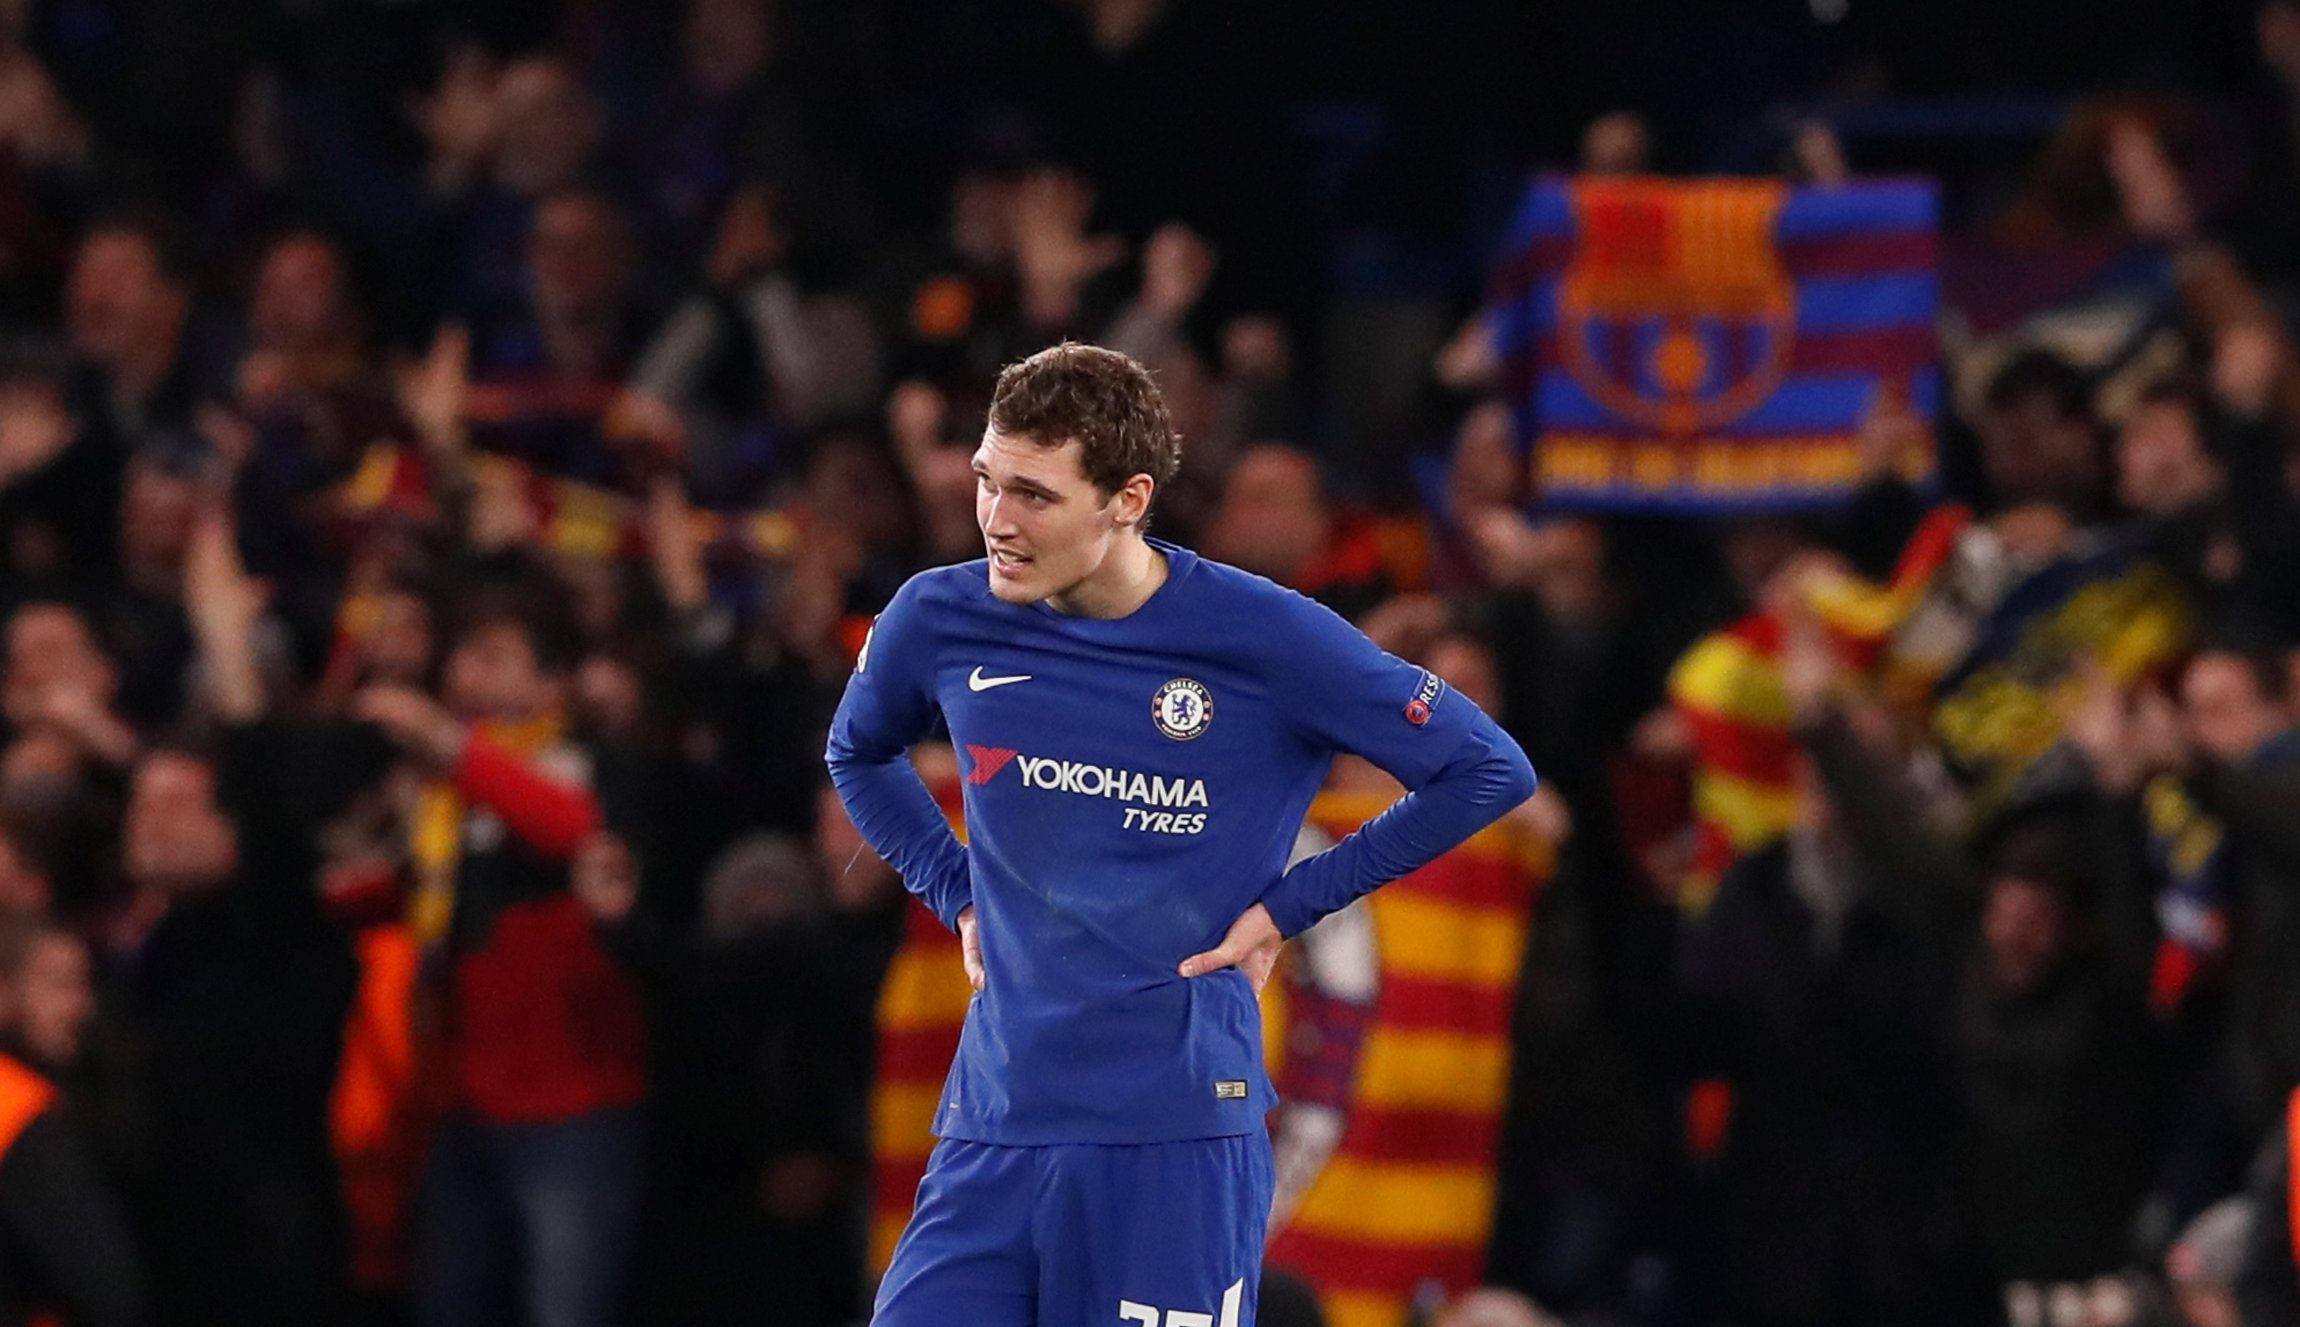 Soccer Football - Champions League Round of 16 First Leg - Chelsea vs FC Barcelona - Stamford Bridge, London, Britain - February 20, 2018   Chelsea's Andreas Christensen looks dejected after Barcelona’s Lionel Messi scores their first goal    REUTERS/David Klein